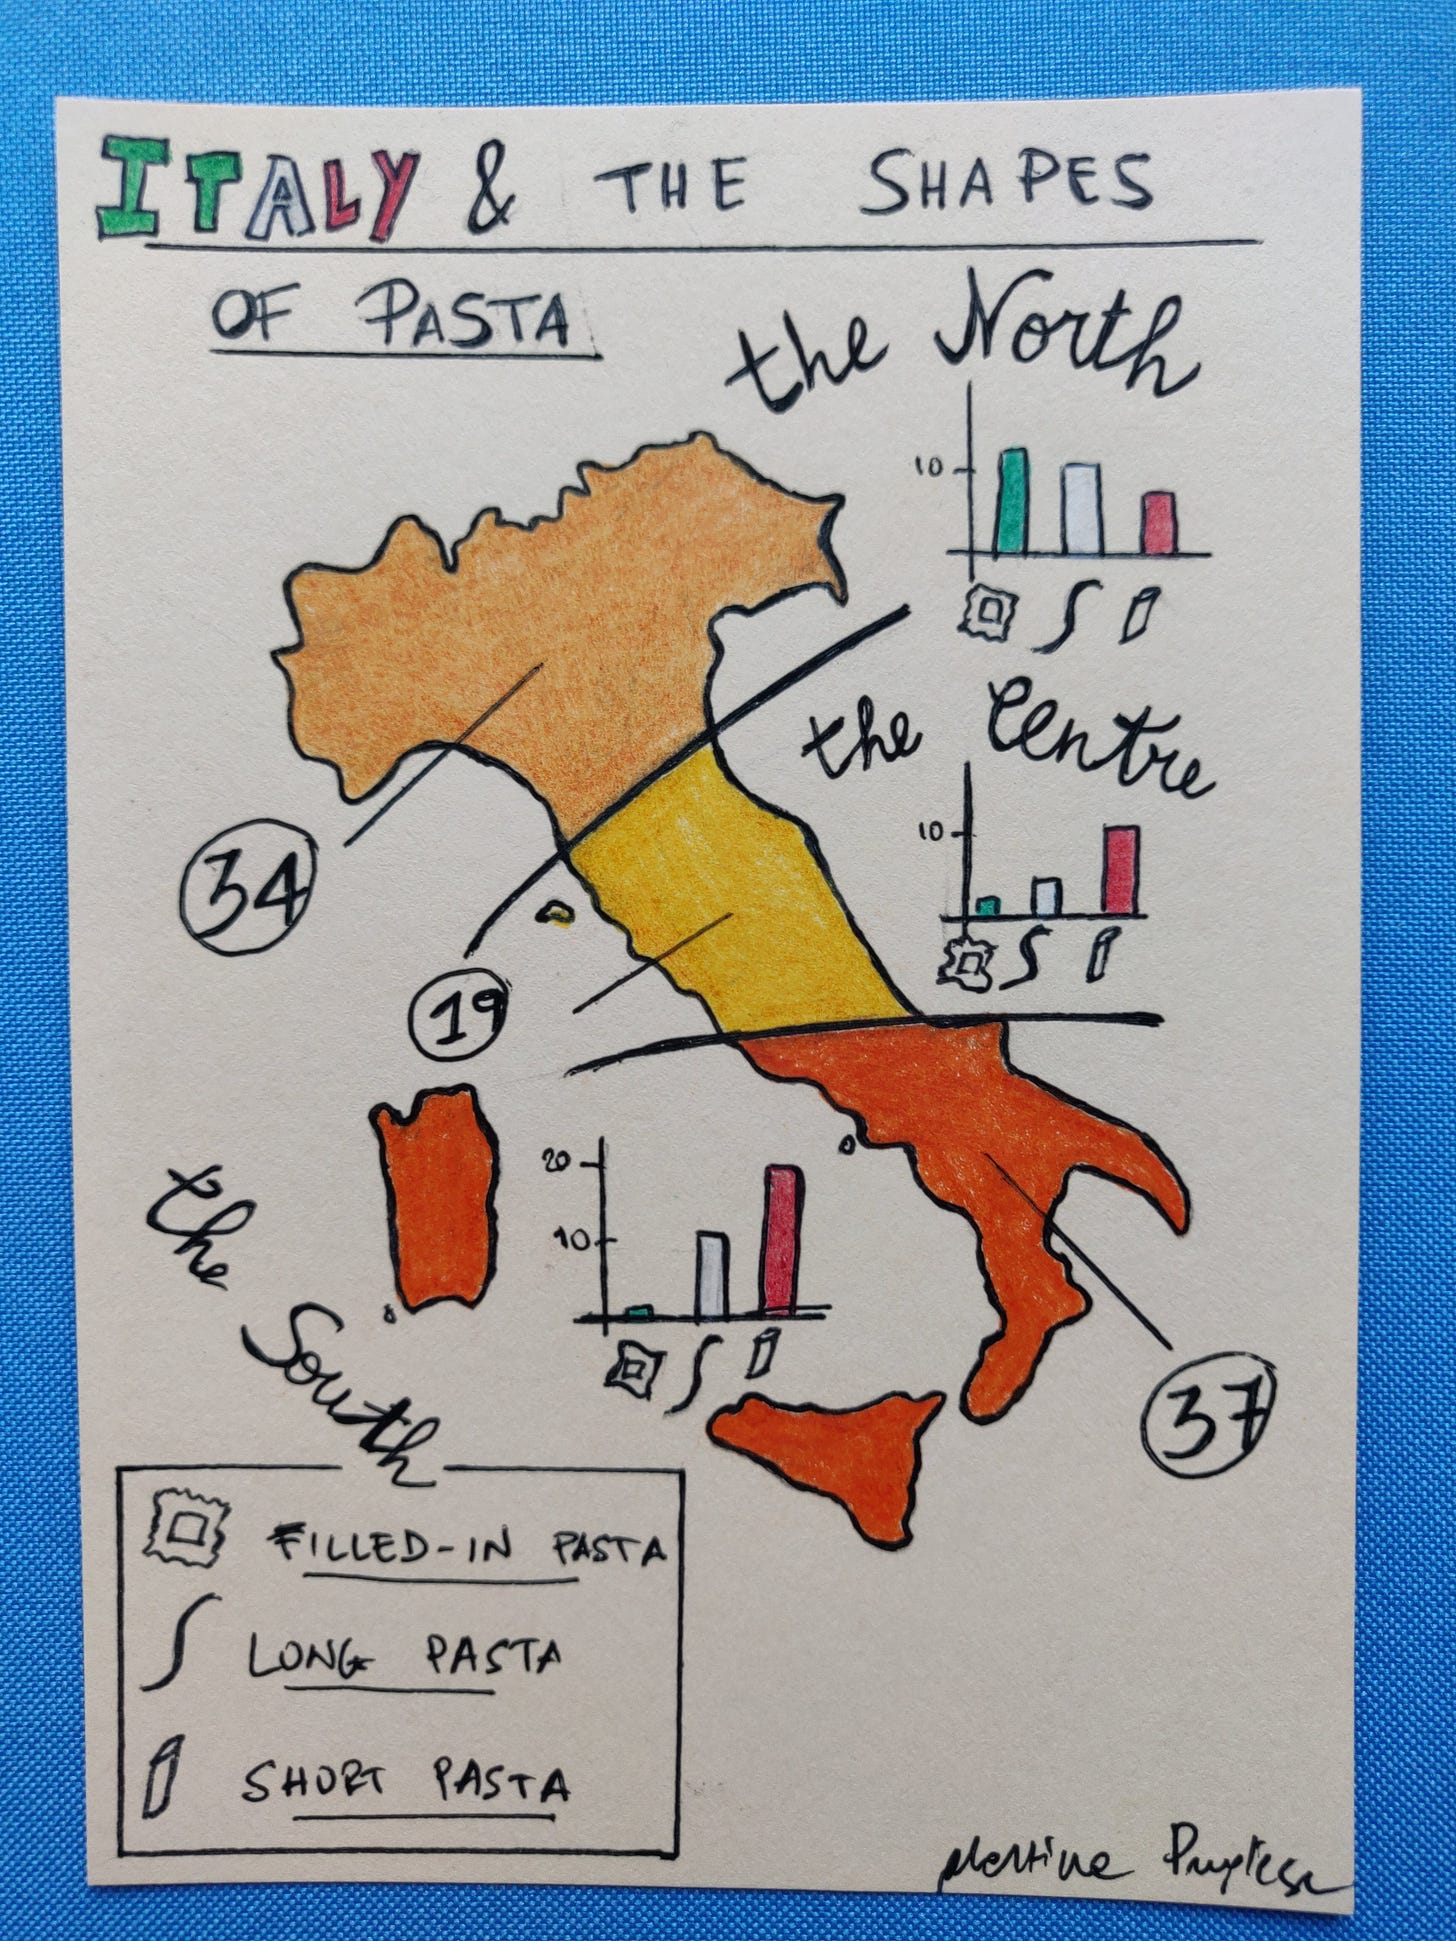 A representation of Italy divided into its three main areas (north, center, south) and the count of pasta shapes for each group, by format (long, short, filled)